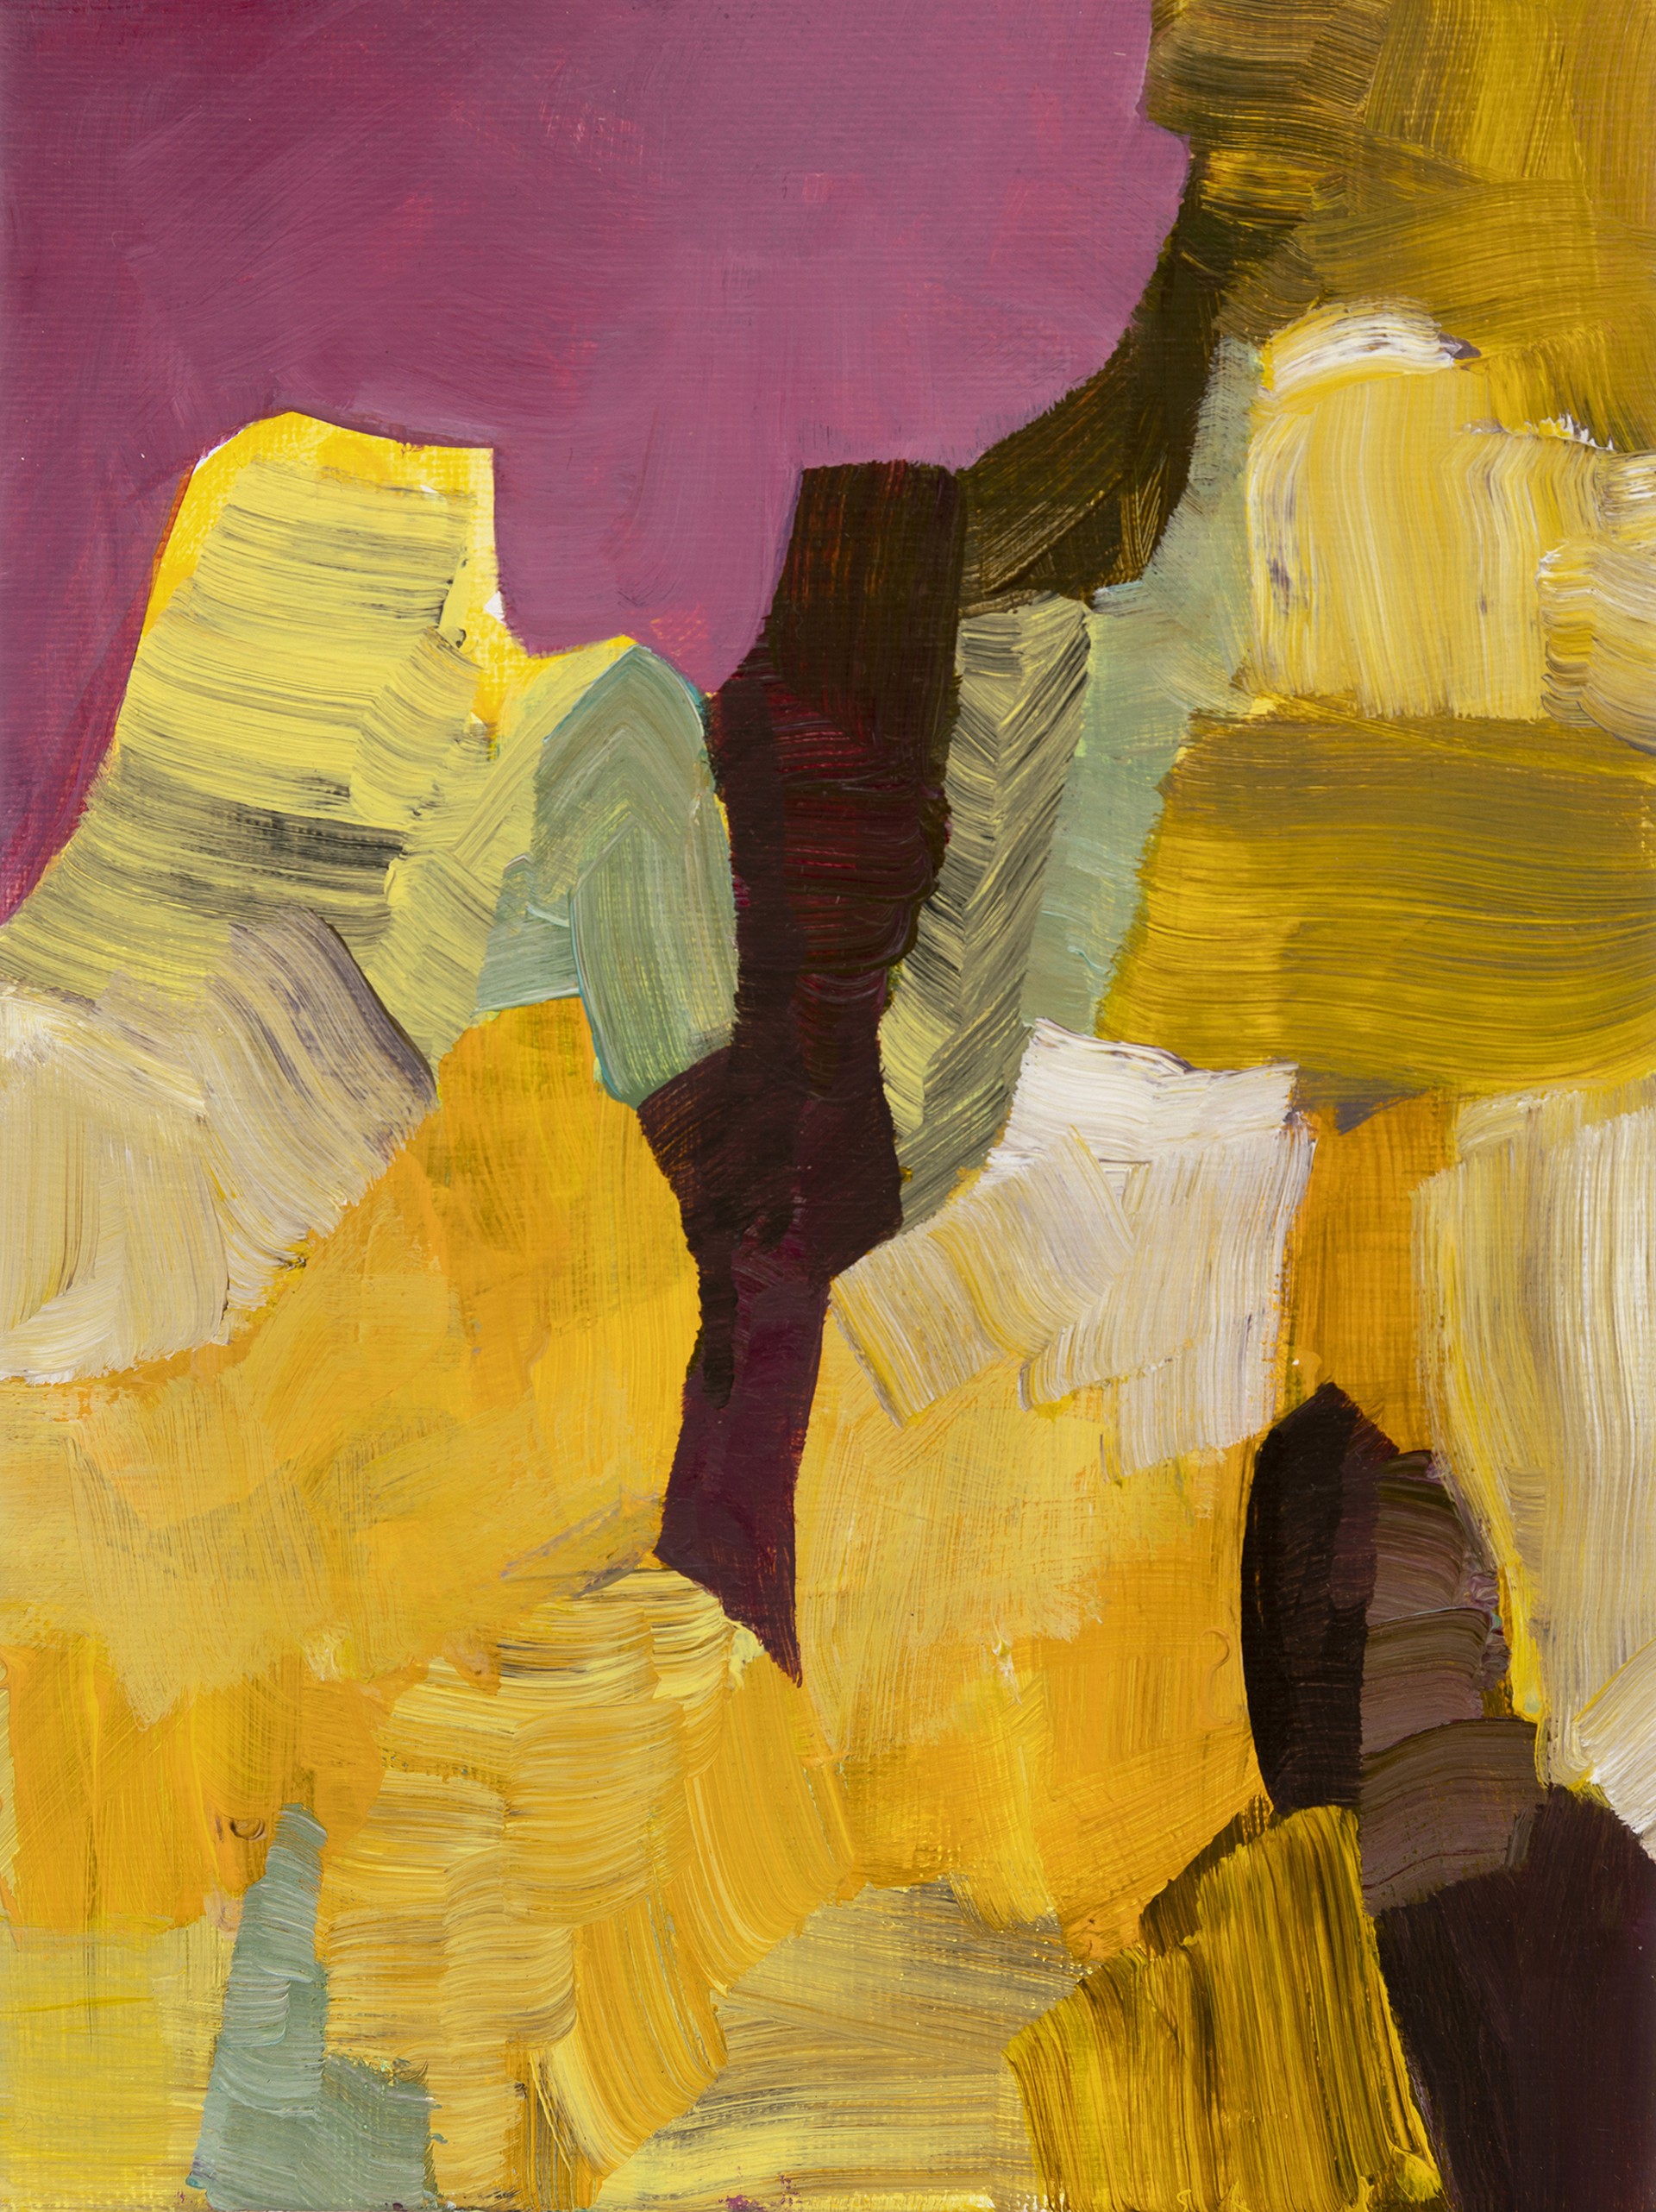 Slot Canyon No. 4 in Purple and Gold by Ann Marie Nafziger